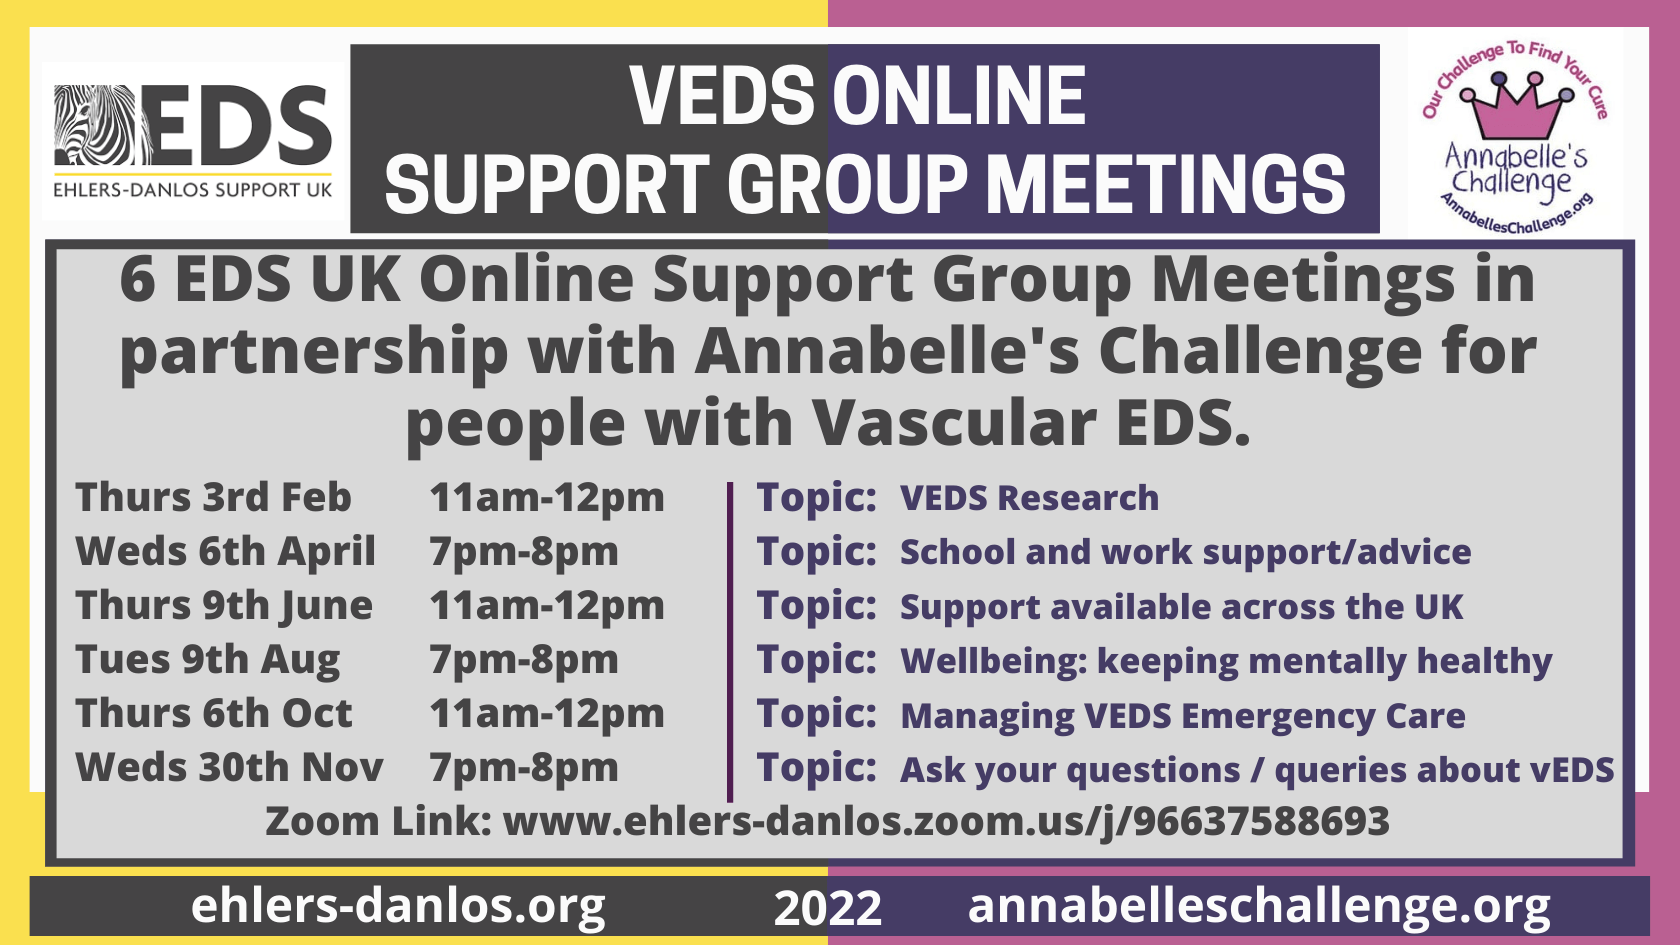 VEDS online support group meetings. Thu 3rd February, 11am – 12pm Wed 6th April, 7pm – 8pm Thu 9th June, 11am – 12pm Tue 9th August, 7pm – 8pm Thu 6th October, 11am – 12pm Wed 30th November, 7pm – 8pm. Join via zoom.